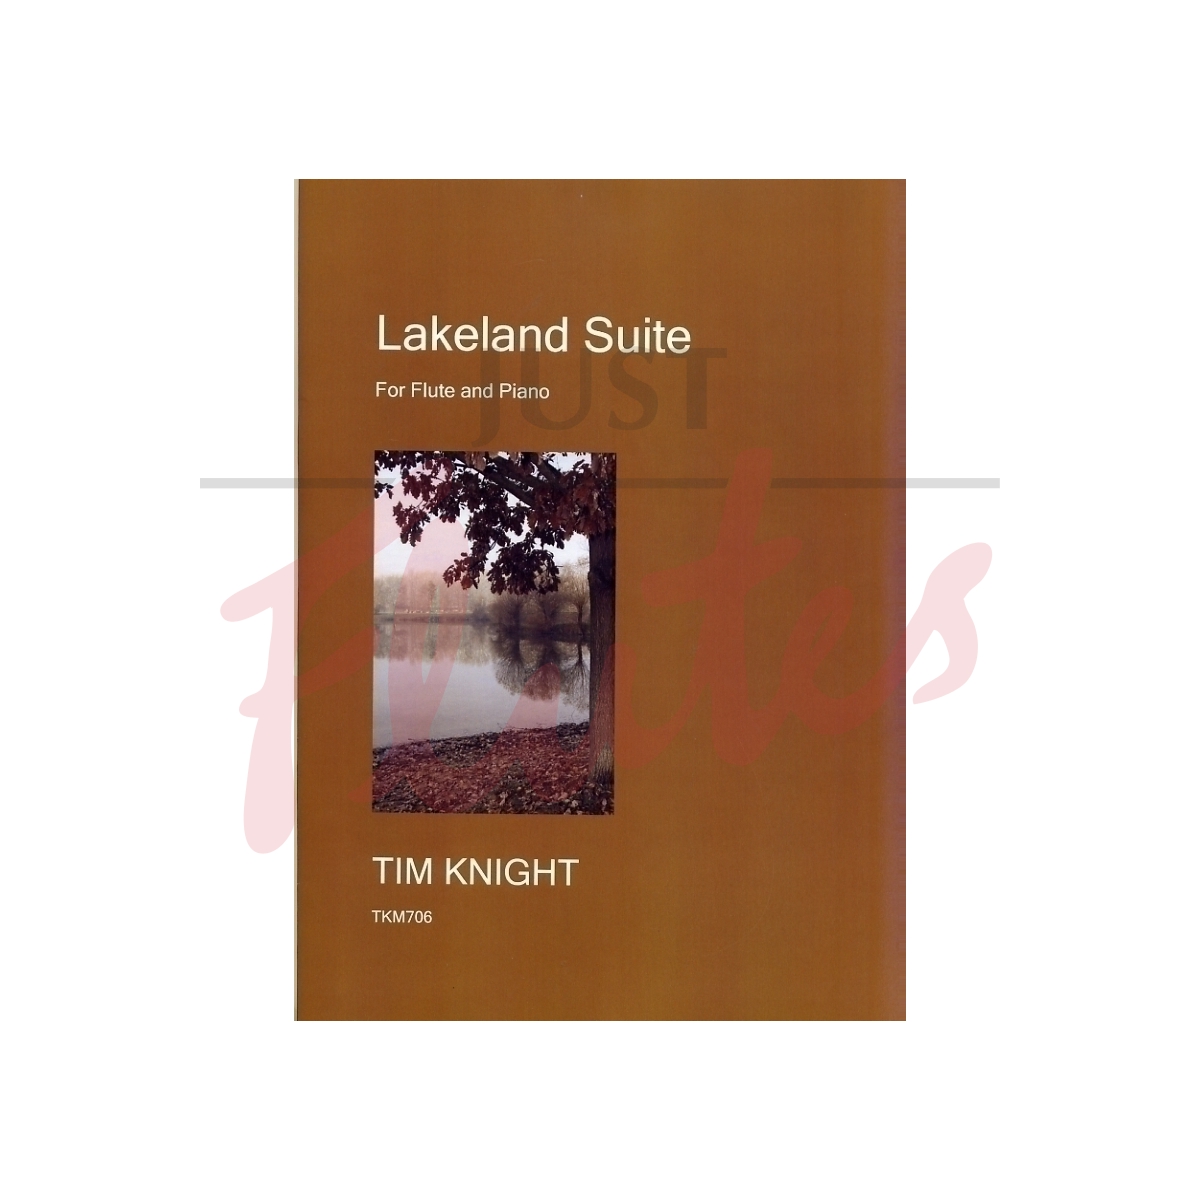 Lakeland Suite for Flute and Piano